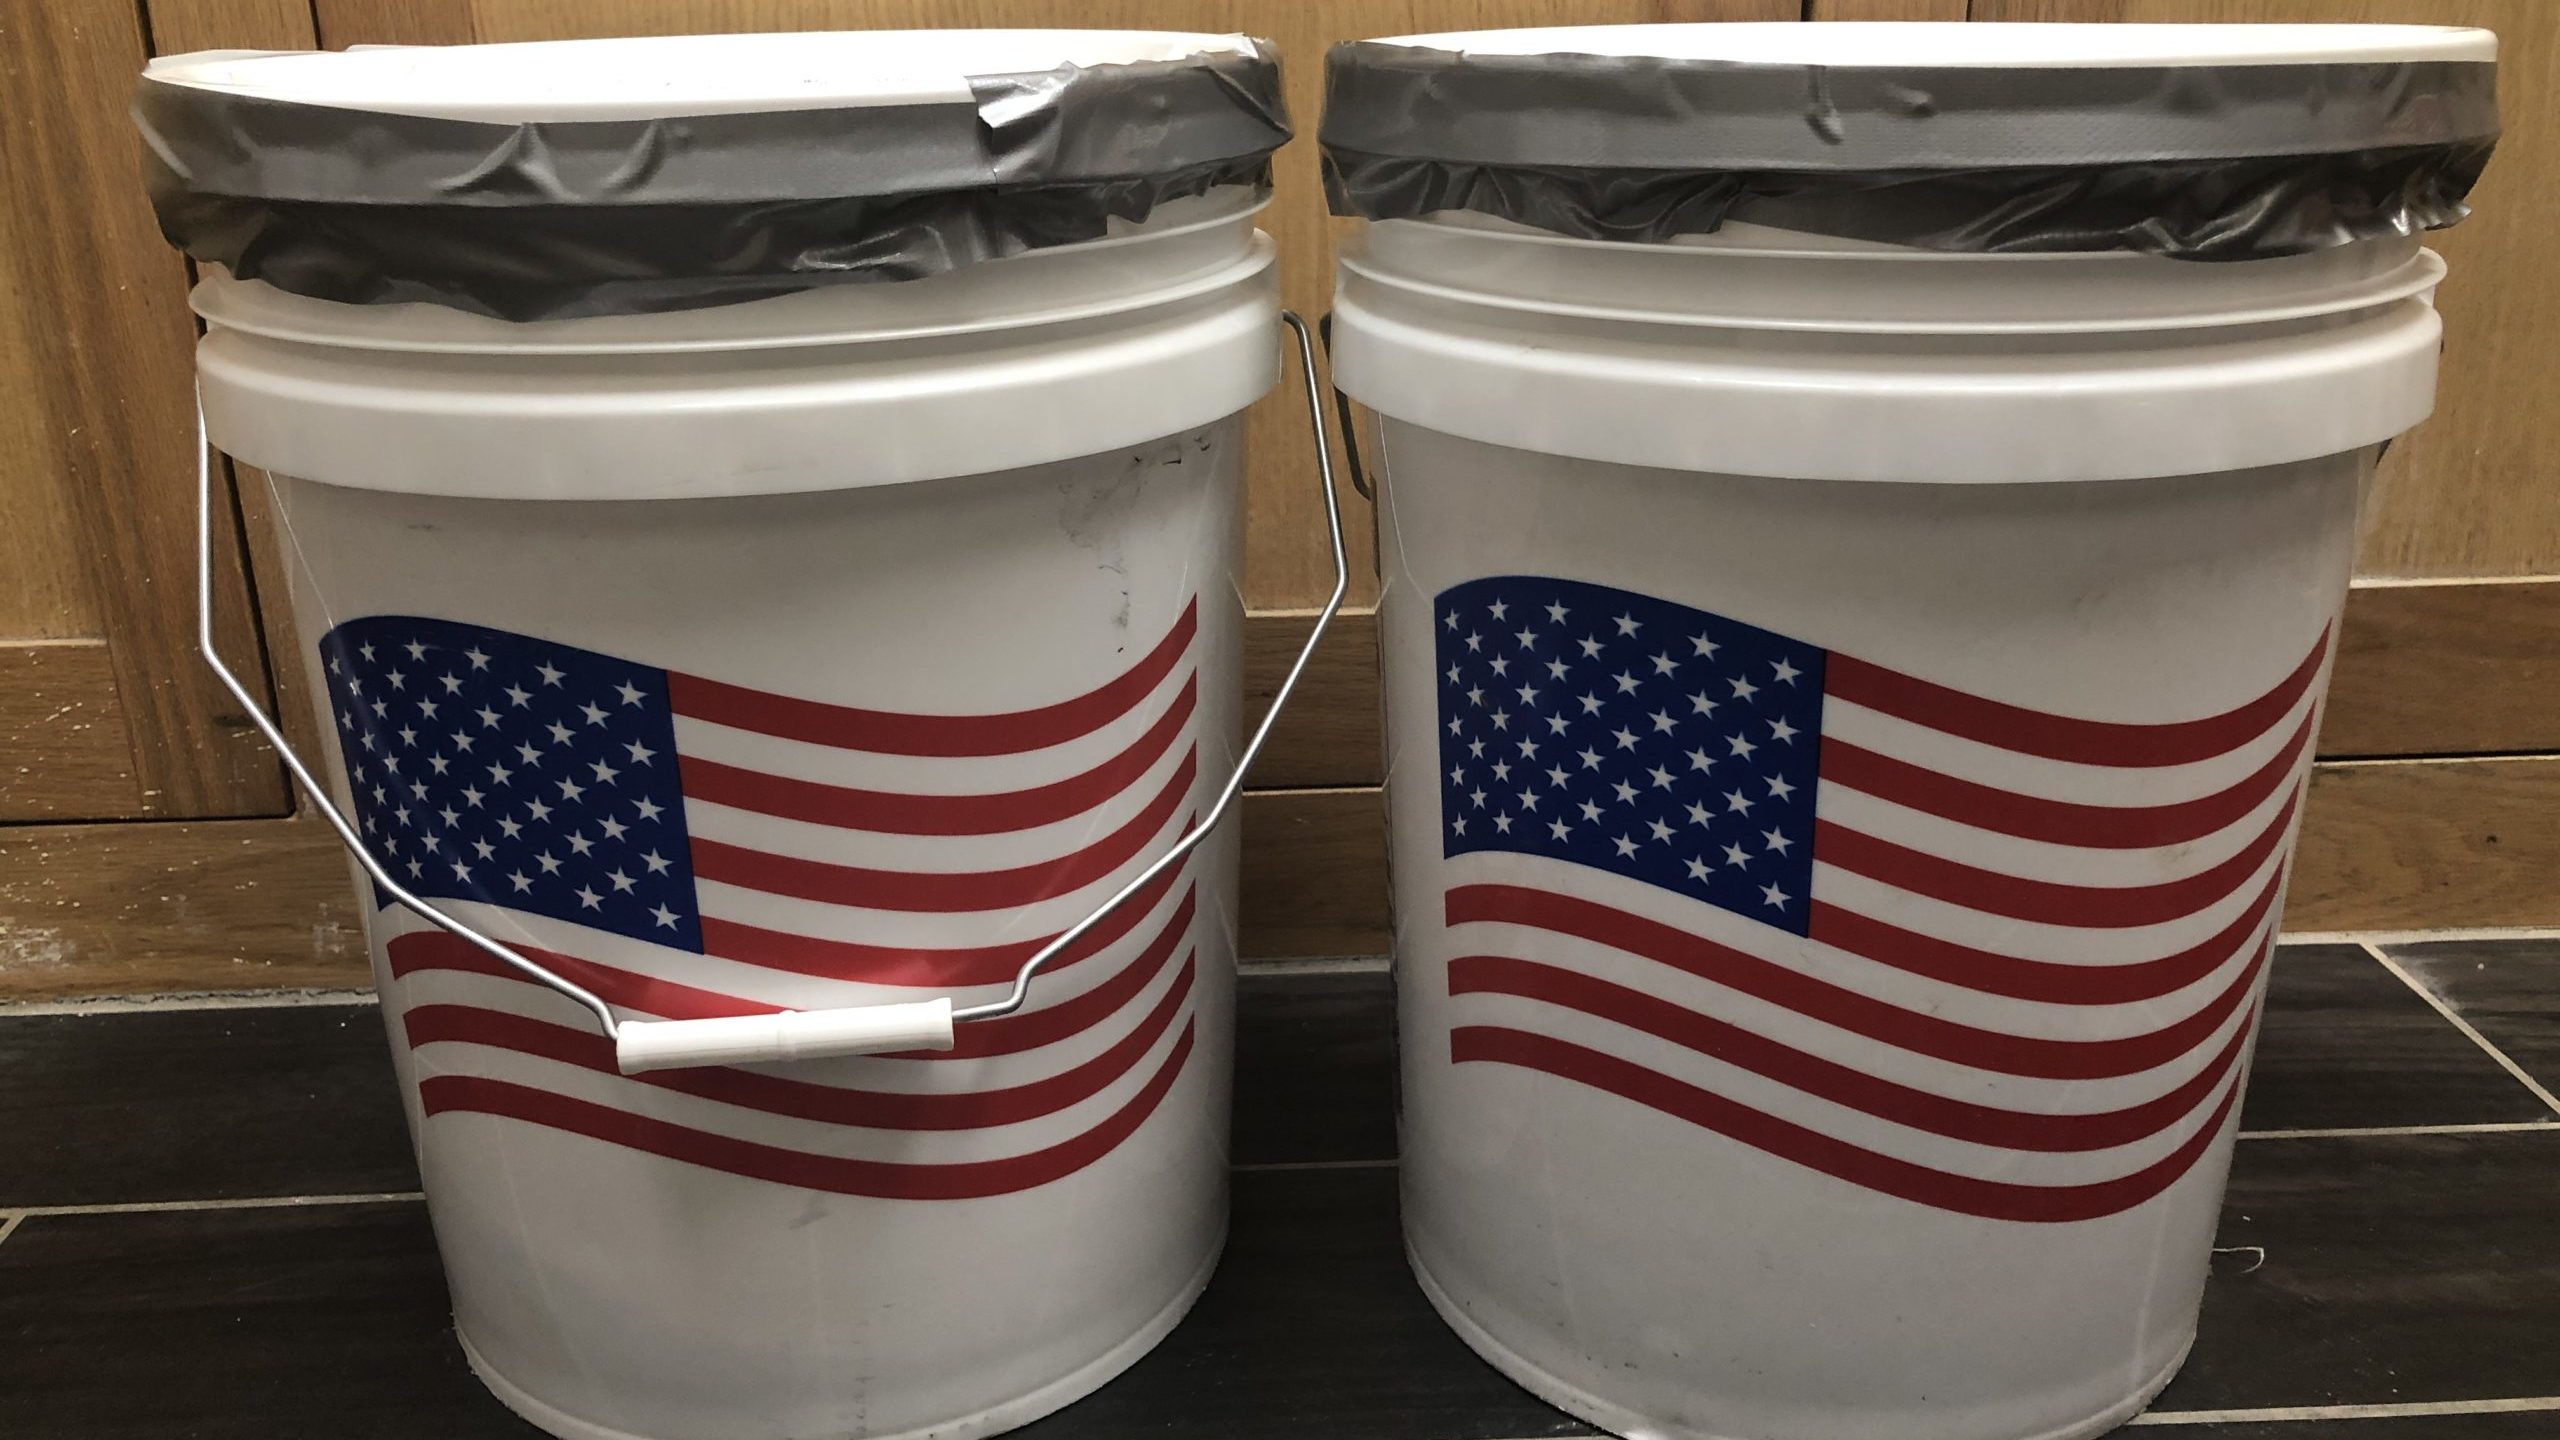 An image of two 5-gallon buckets with american flags on them.